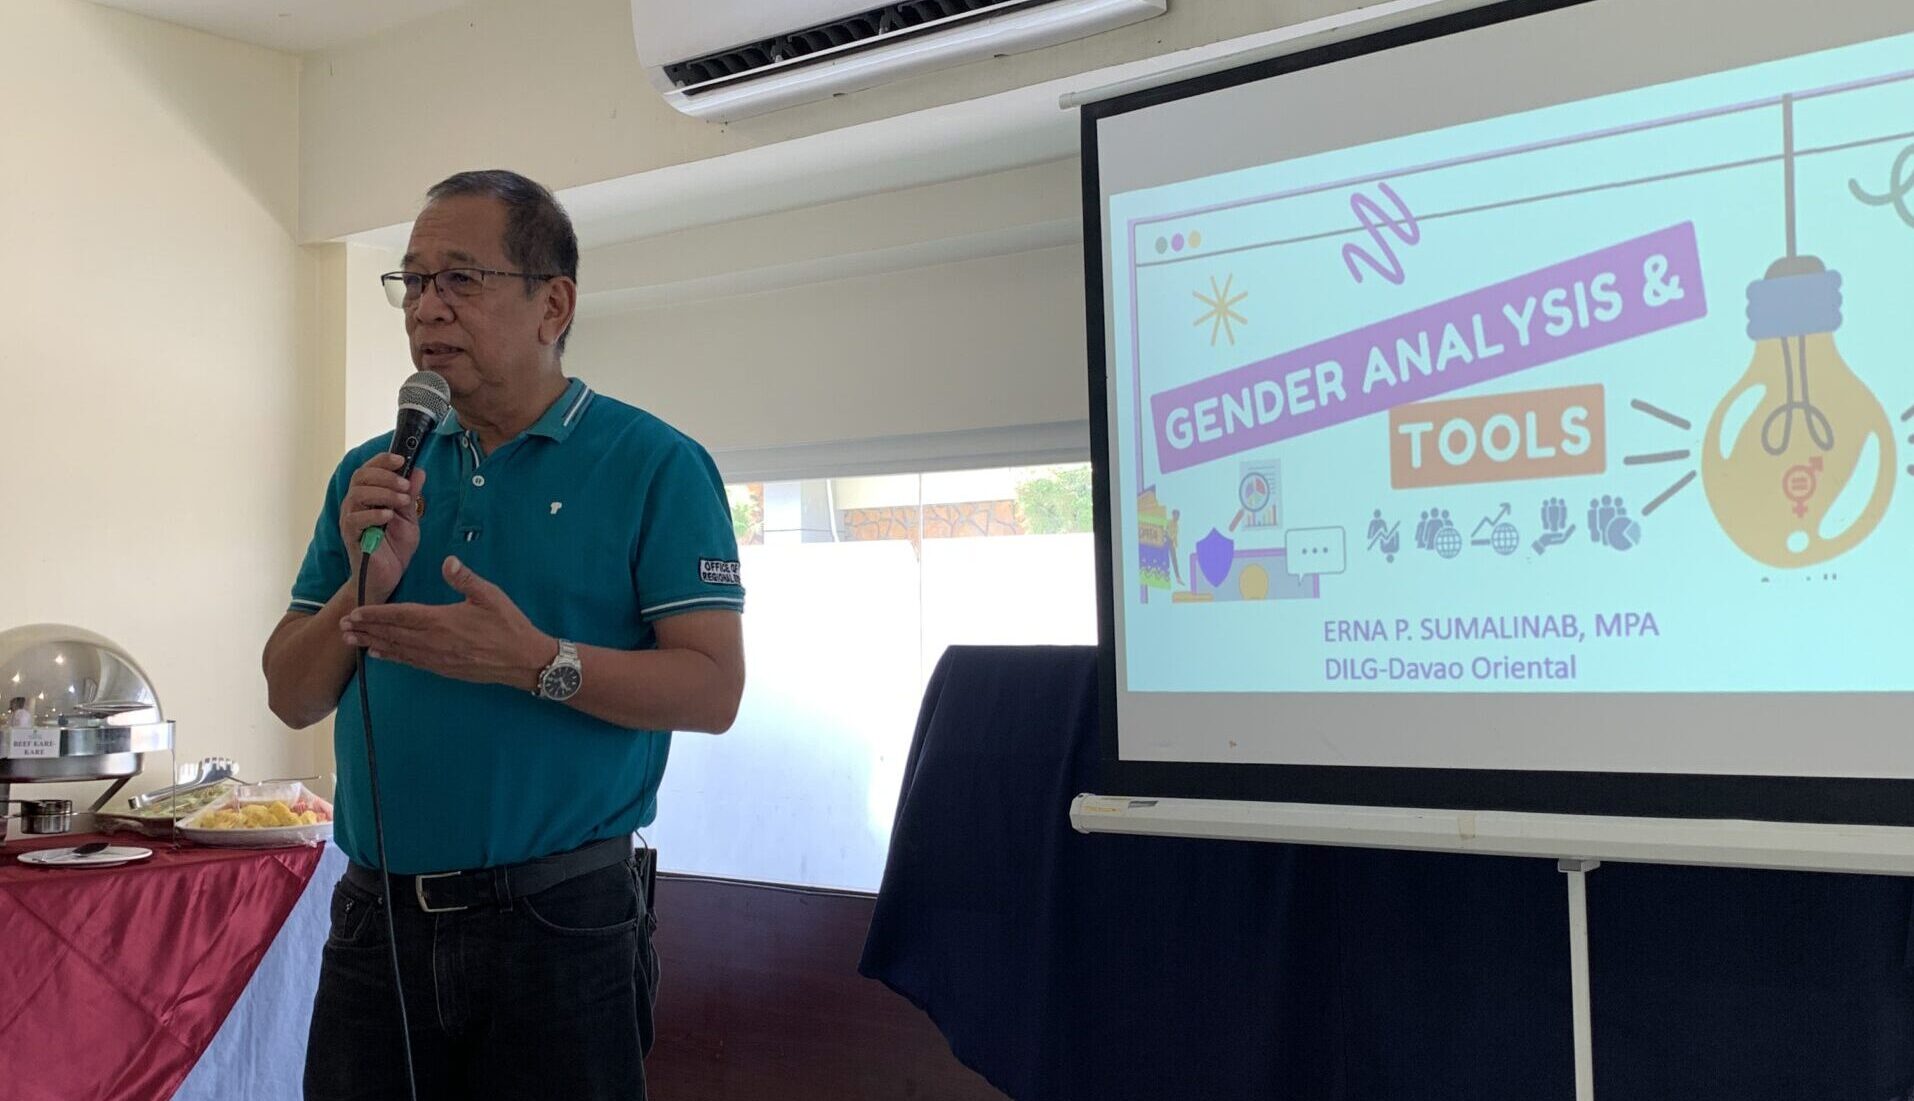 DILG XI conducted a Training on the Basics of Gender Analysis for the GFPS Members